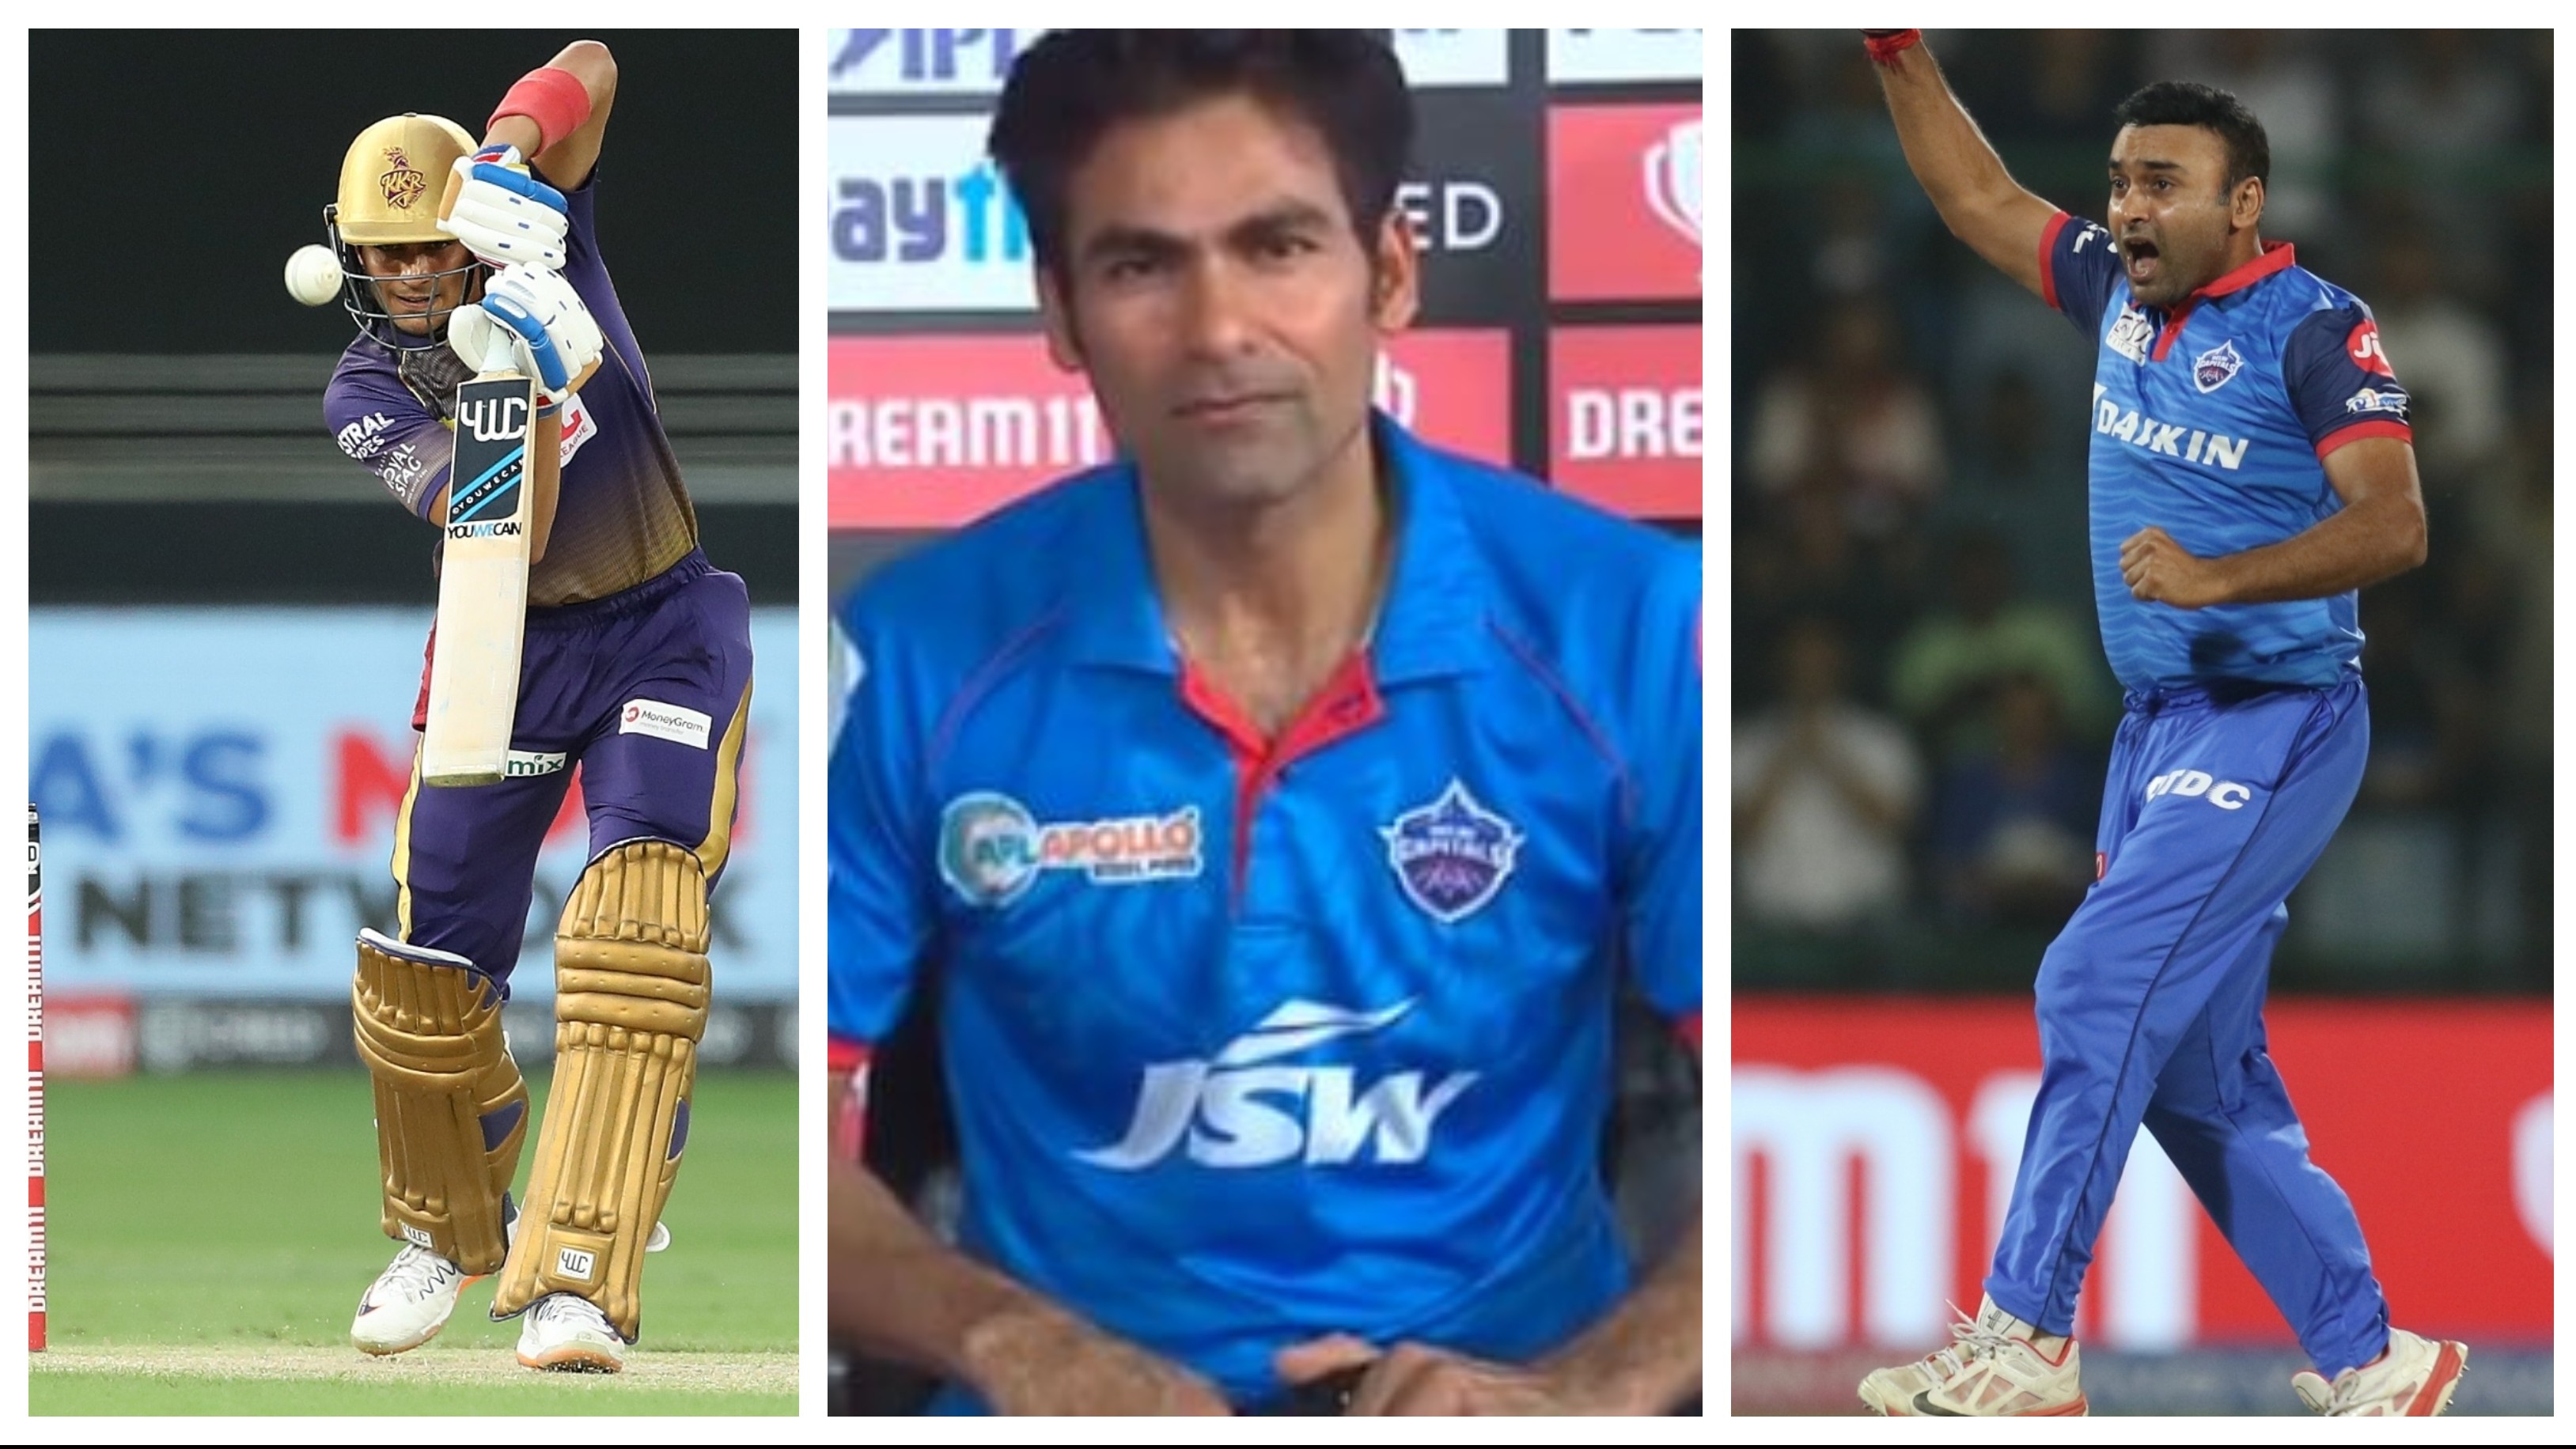 IPL 2020: Kaif lauds Amit Mishra for crucial wicket of Shubman Gill in DC's win over KKR